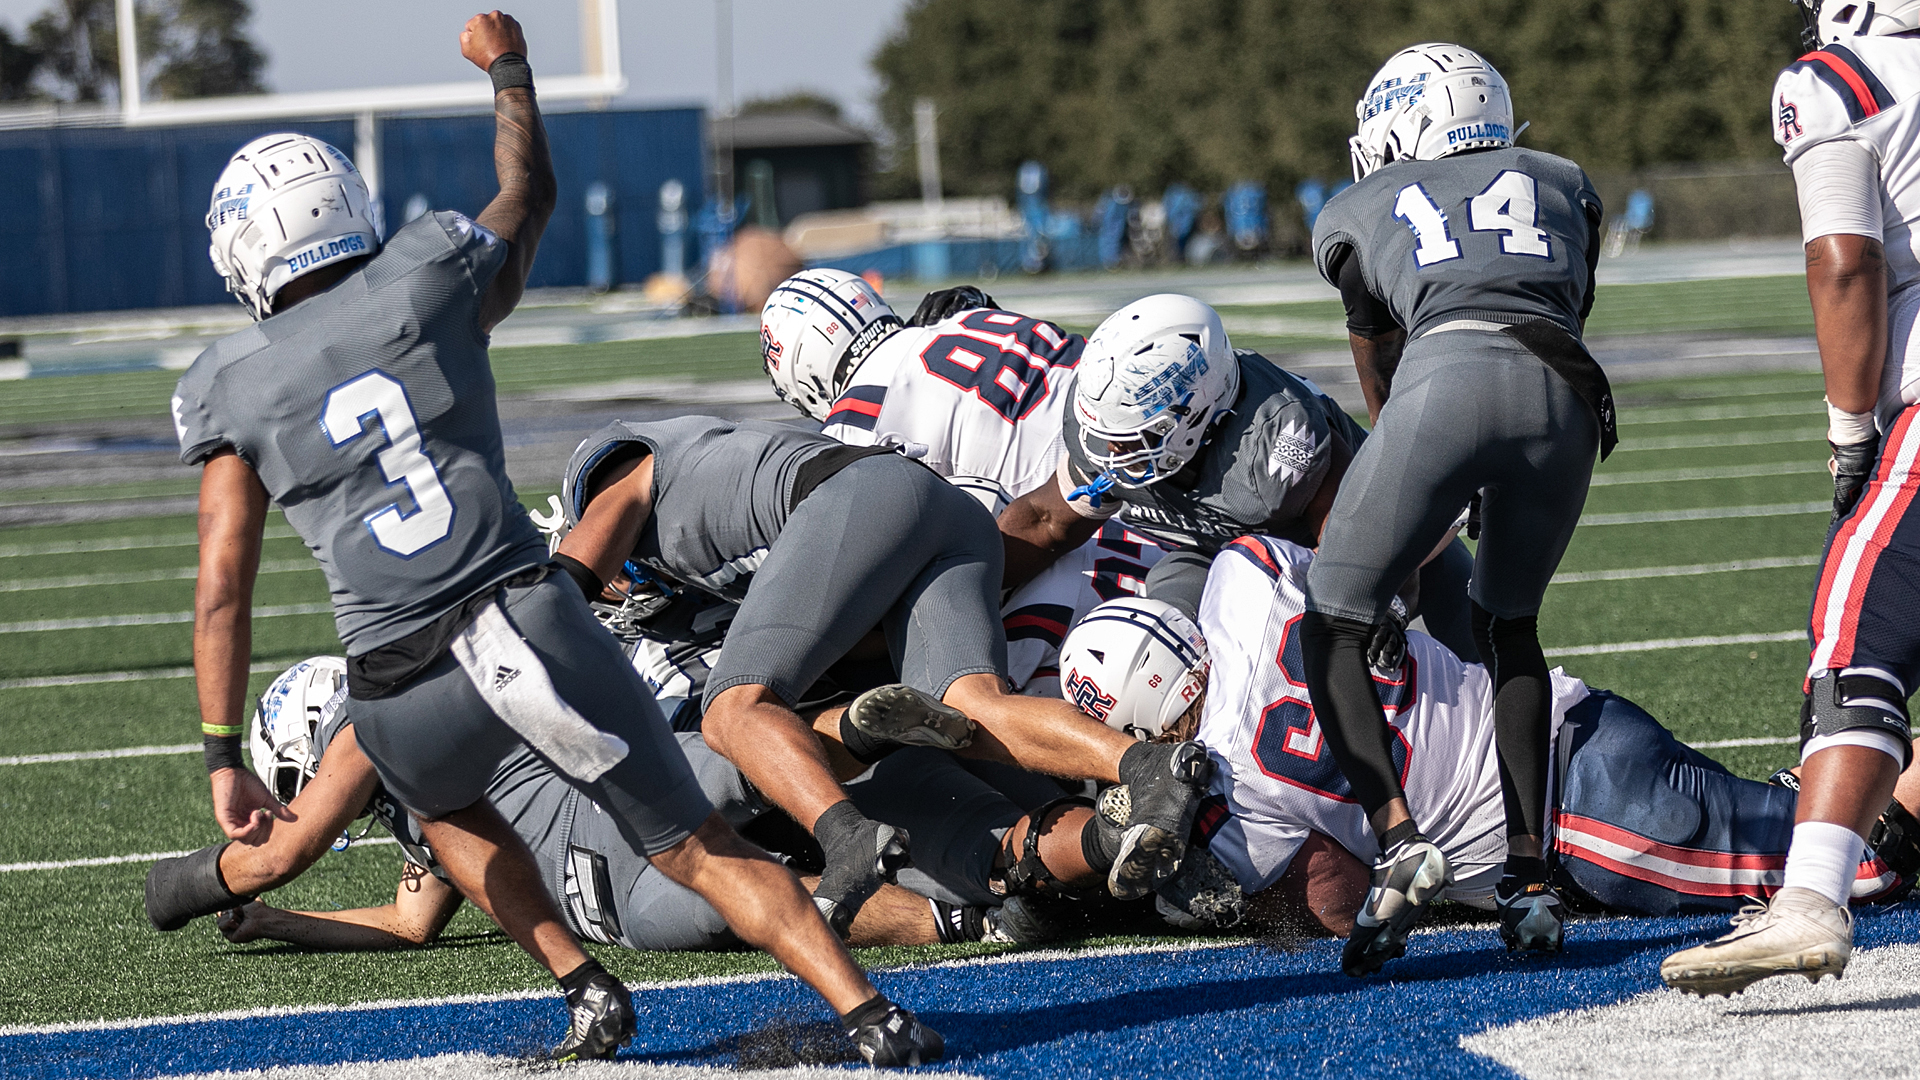 The Bulldogs' defense stops ARC short on its two-point conversion try late in Saturday's win. (Photo by Ronald Rugel)